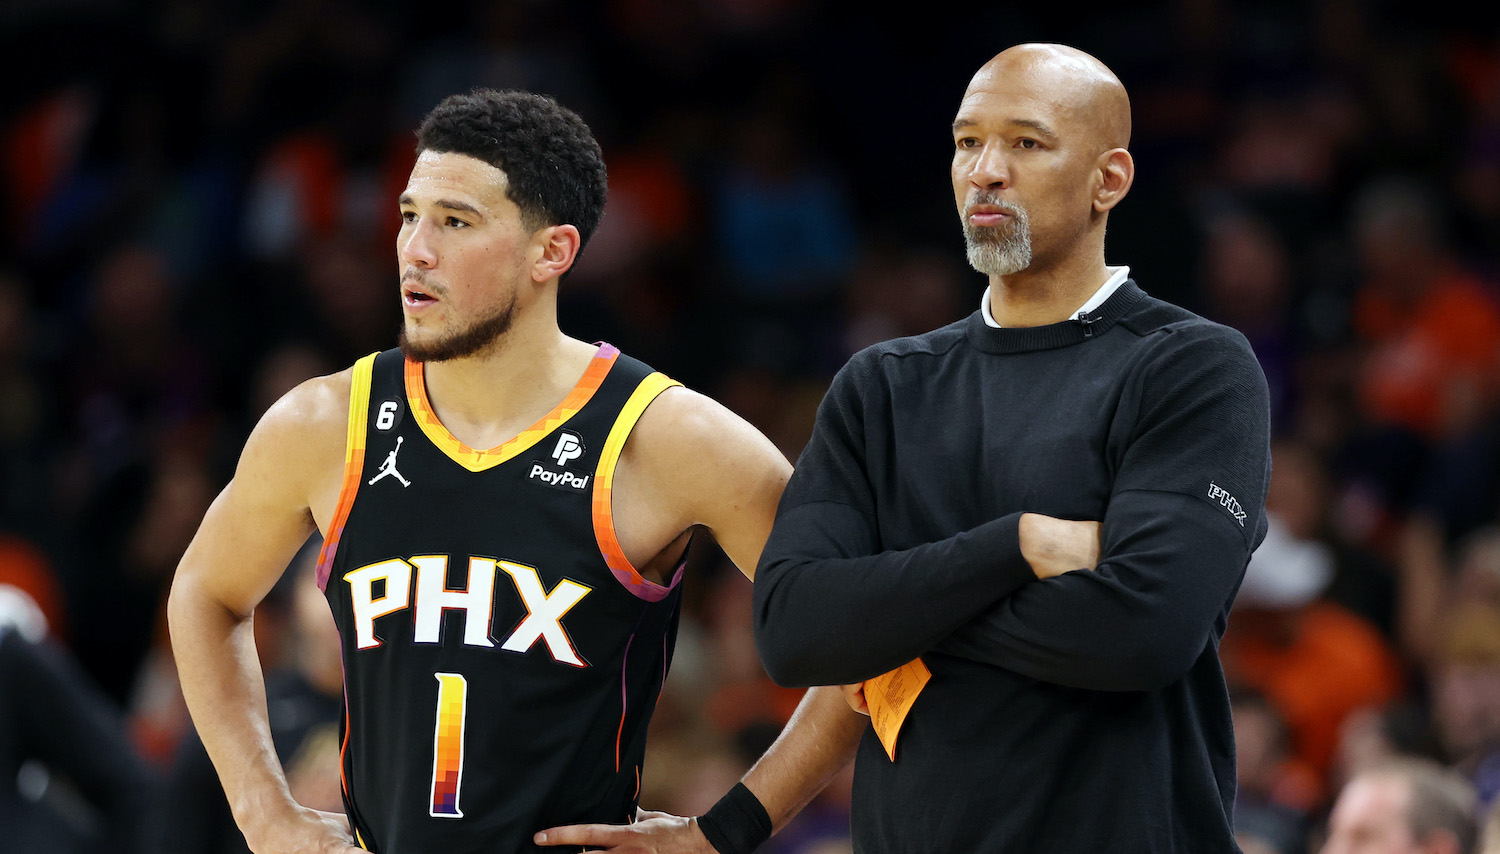 PHOENIX, ARIZONA - MAY 11: Devin Booker #1 stands with head coach Monty Williams of the Phoenix Suns during the second quarter against the Denver Nuggets in game six of the Western Conference Semifinal Playoffs at Footprint Center on May 11, 2023 in Phoenix, Arizona. NOTE TO USER: User expressly acknowledges and agrees that, by downloading and or using this photograph, User is consenting to the terms and conditions of the Getty Images License Agreement. (Photo by Christian Petersen/Getty Images)